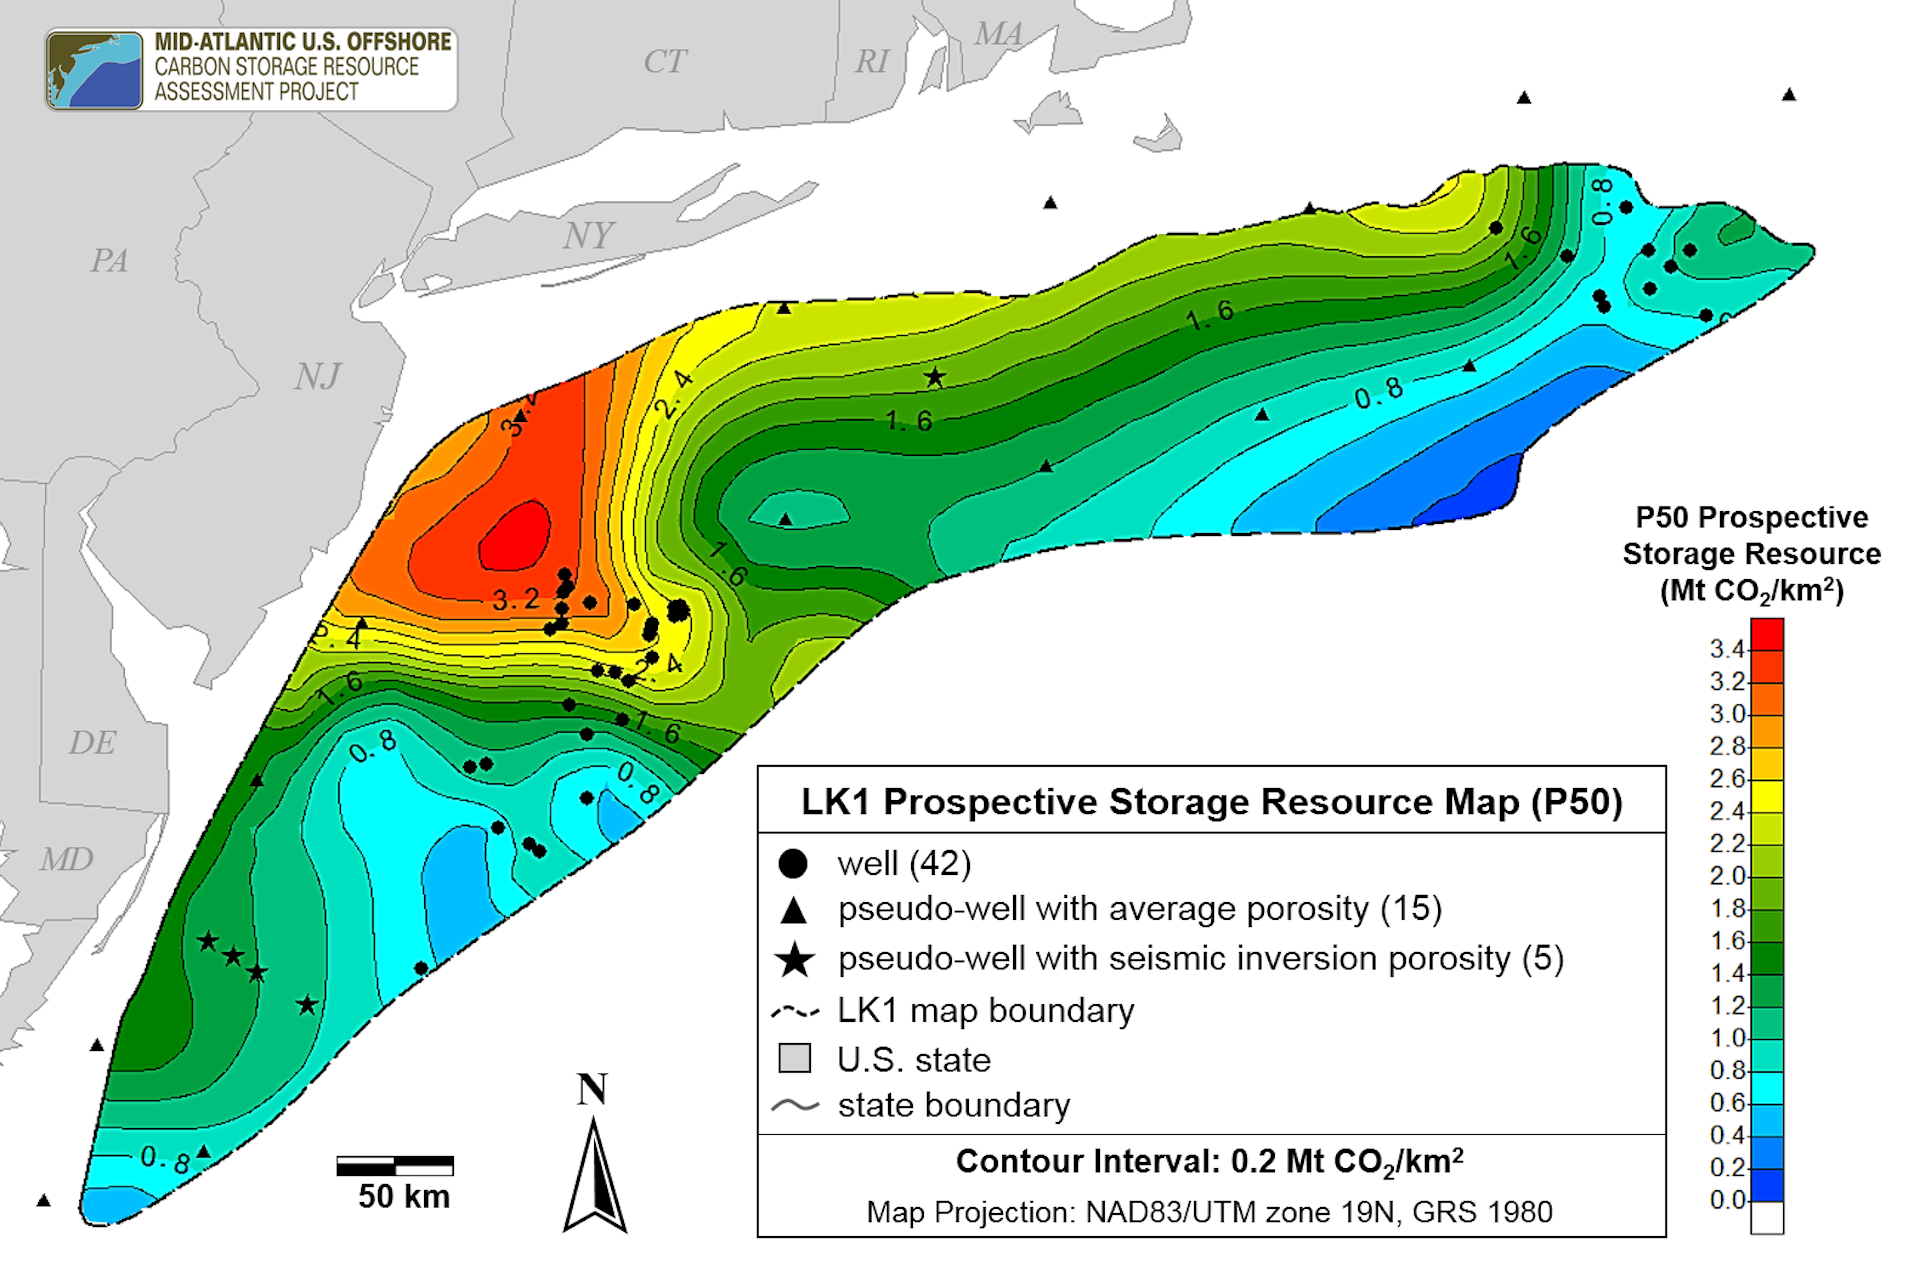 A map in blue, green, yellow, orange, and red showing undersea storage options in the vicinity of offshore wind farm lease areas